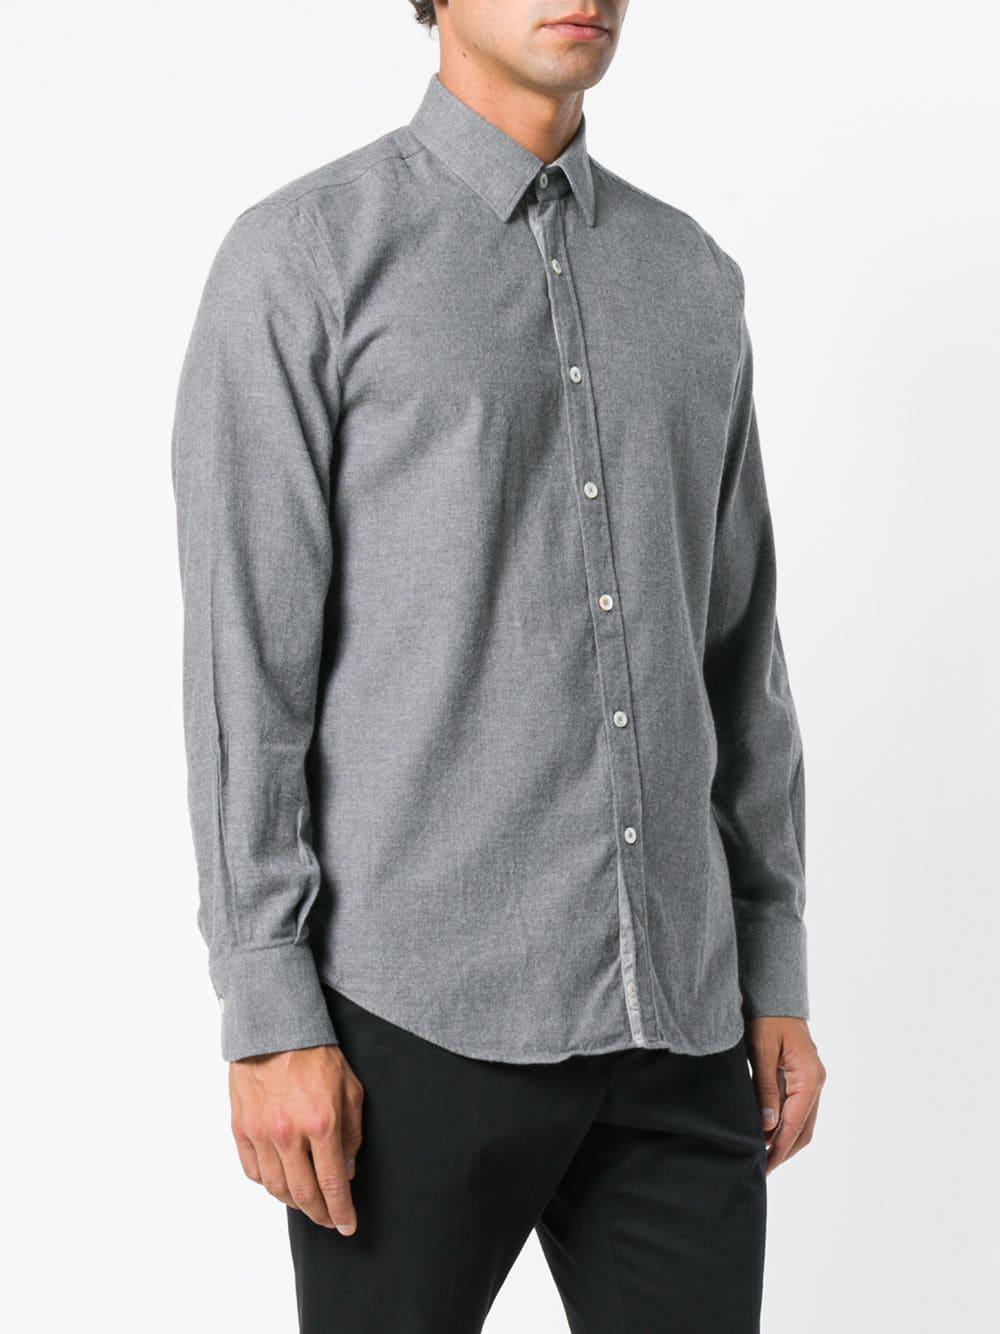 Canali Cotton Classic Curved Hem Shirt in Grey (Gray) for Men - Lyst